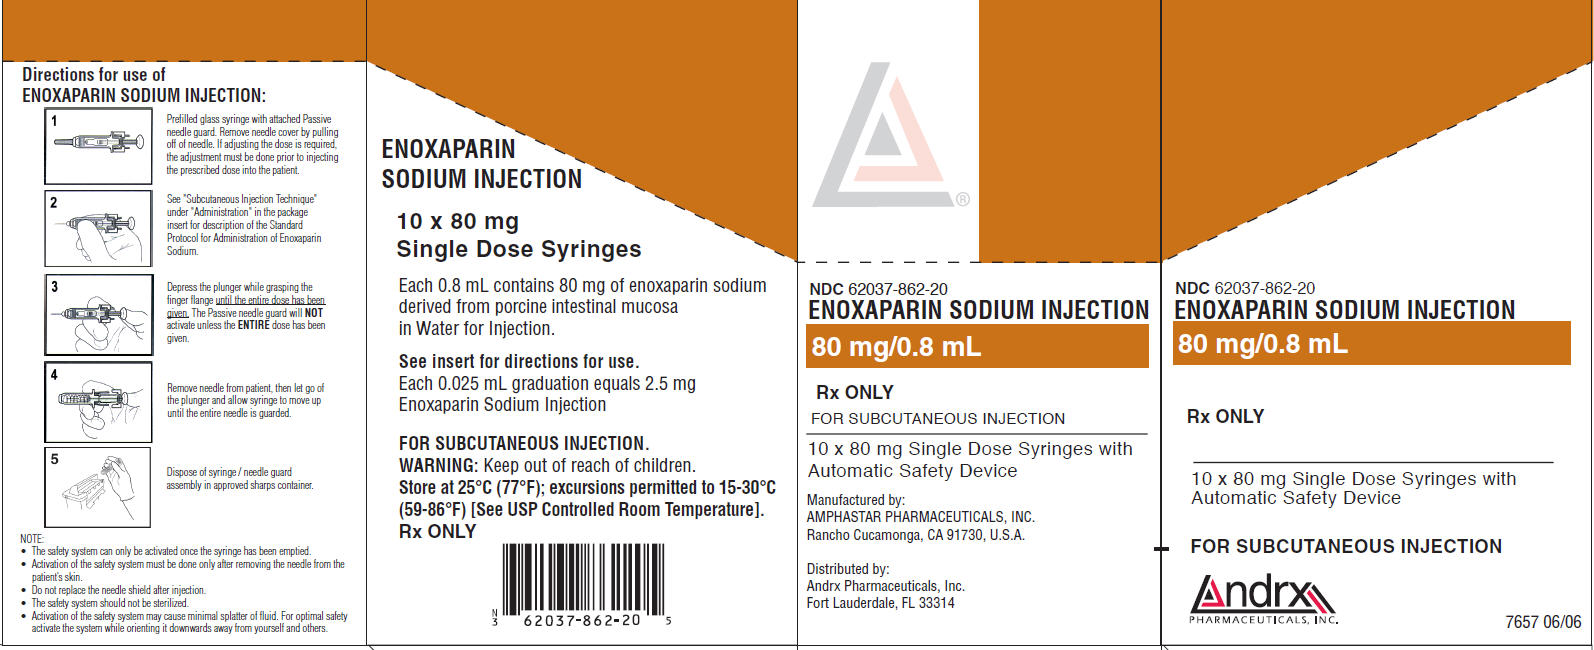 NDC 62037-862-20 ENOXAPARIN SODIUM INJECTION 80 mg/0.8 mL Rx ONLY FOR SUBCUTANEOUS INJECTION 10 x 80 mg Single Dose Syringes with Automatic Safety Device